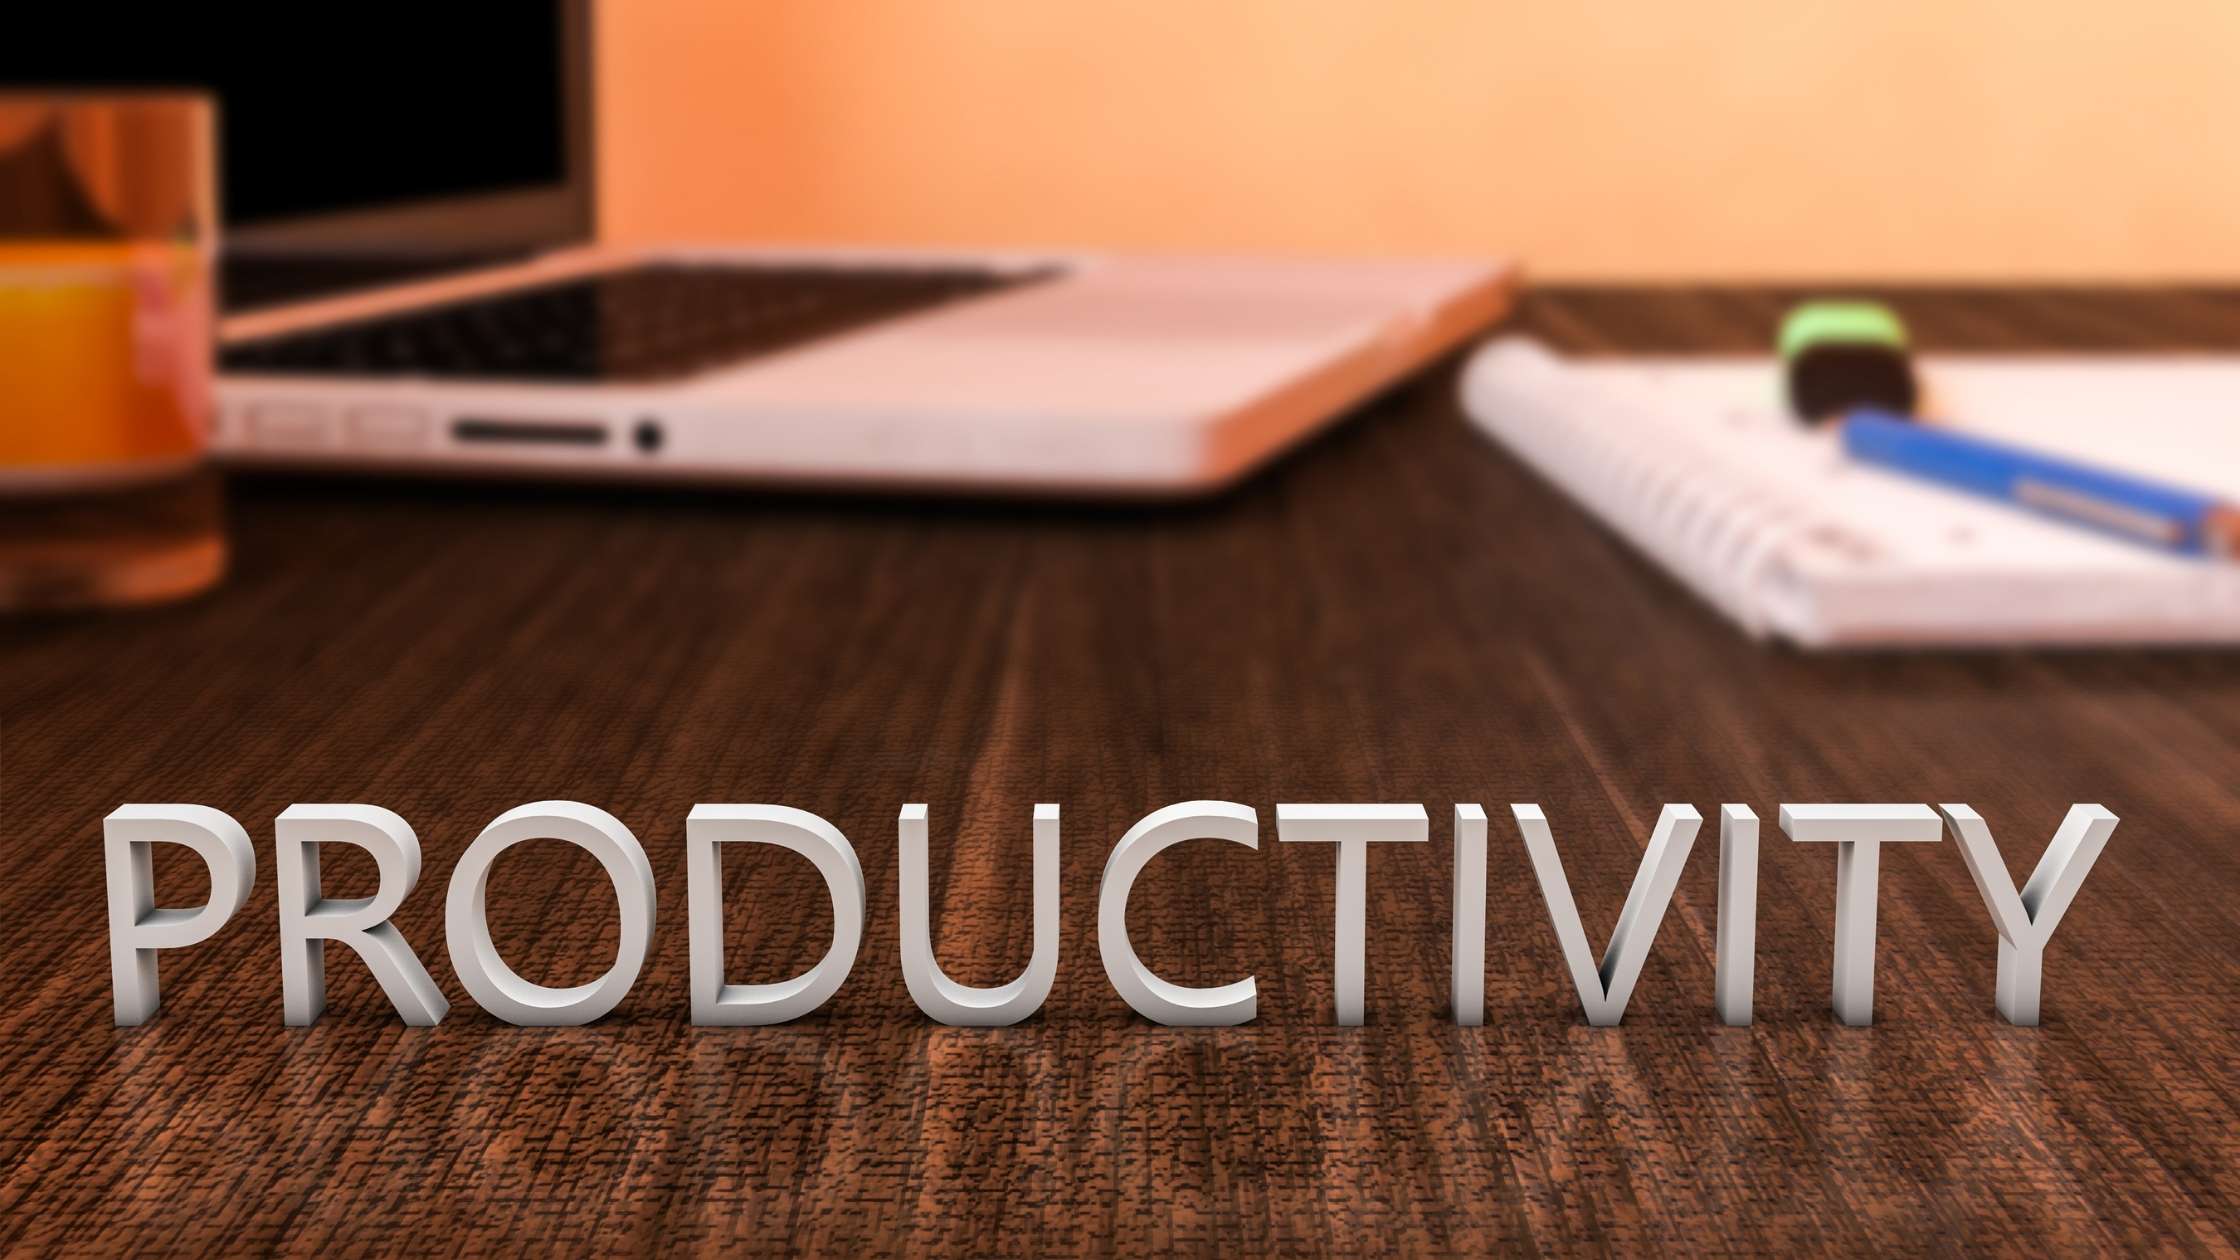 What are the 5 Main Things That Affect Productivity